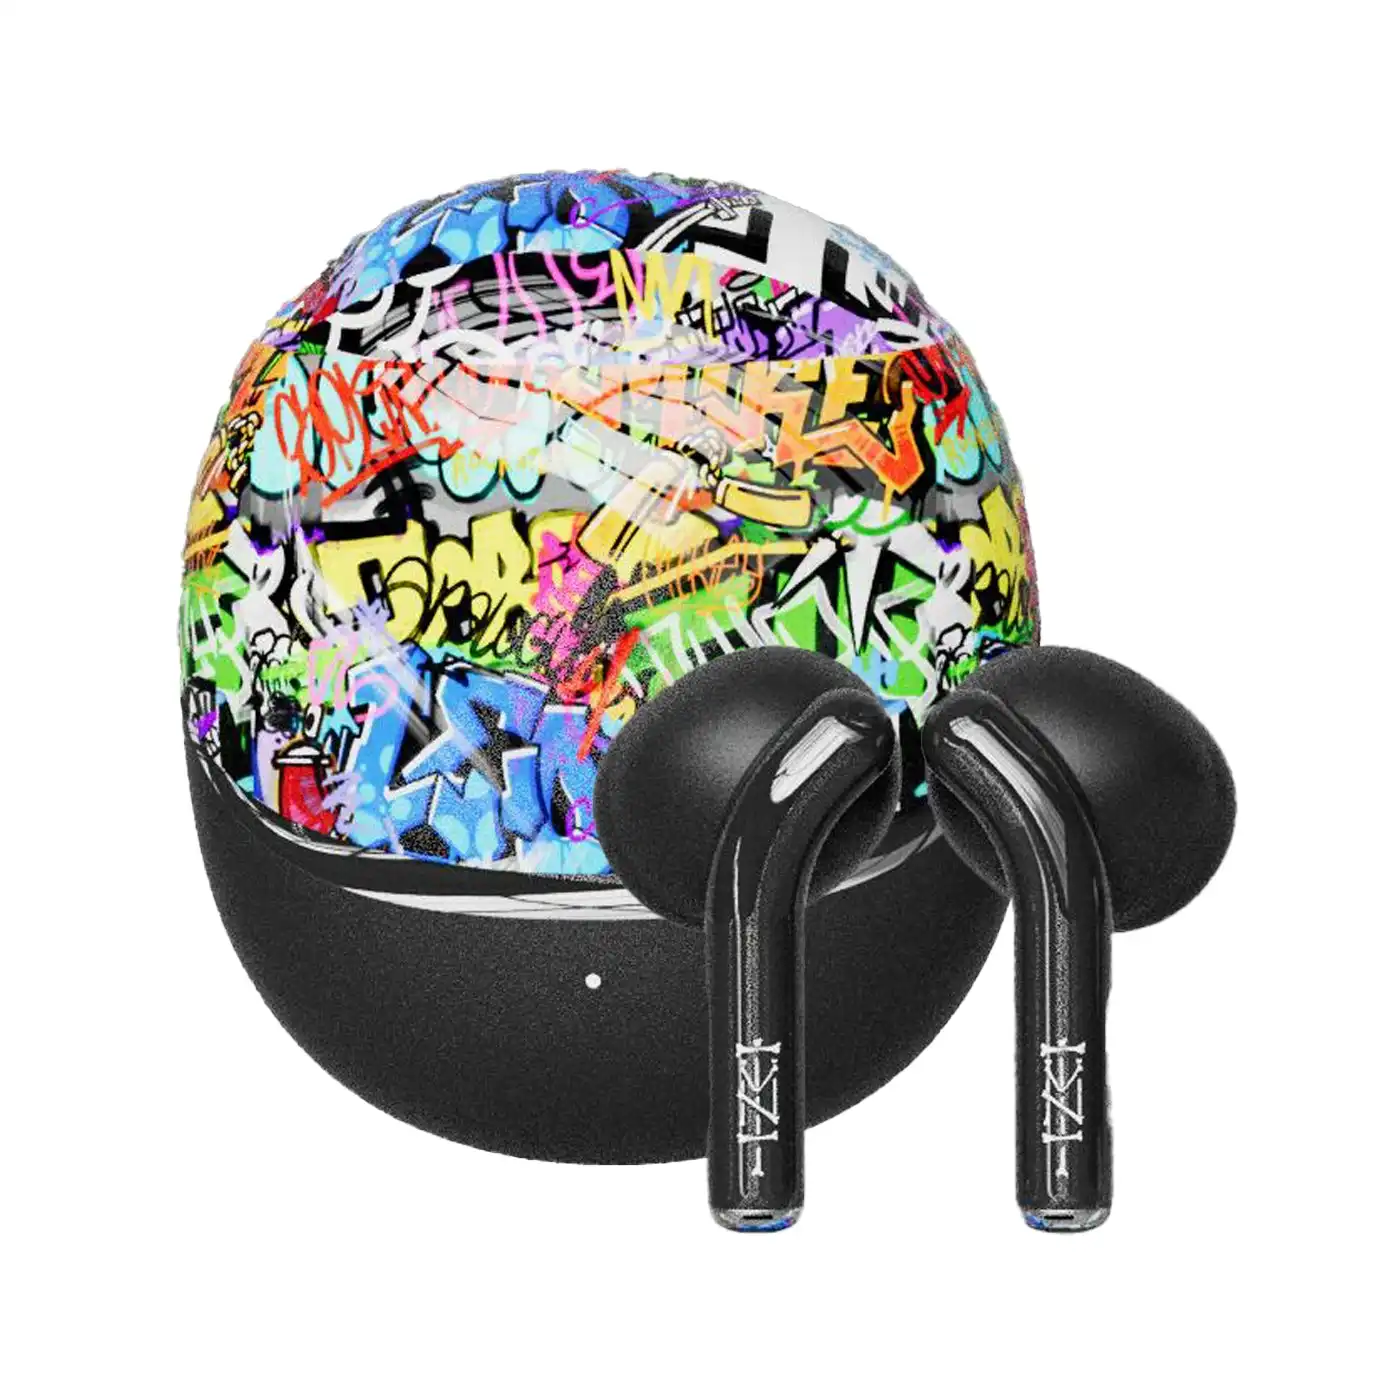 TMNT Bluetooth TWS Earbuds - Superior Sound & Noise Cancelling